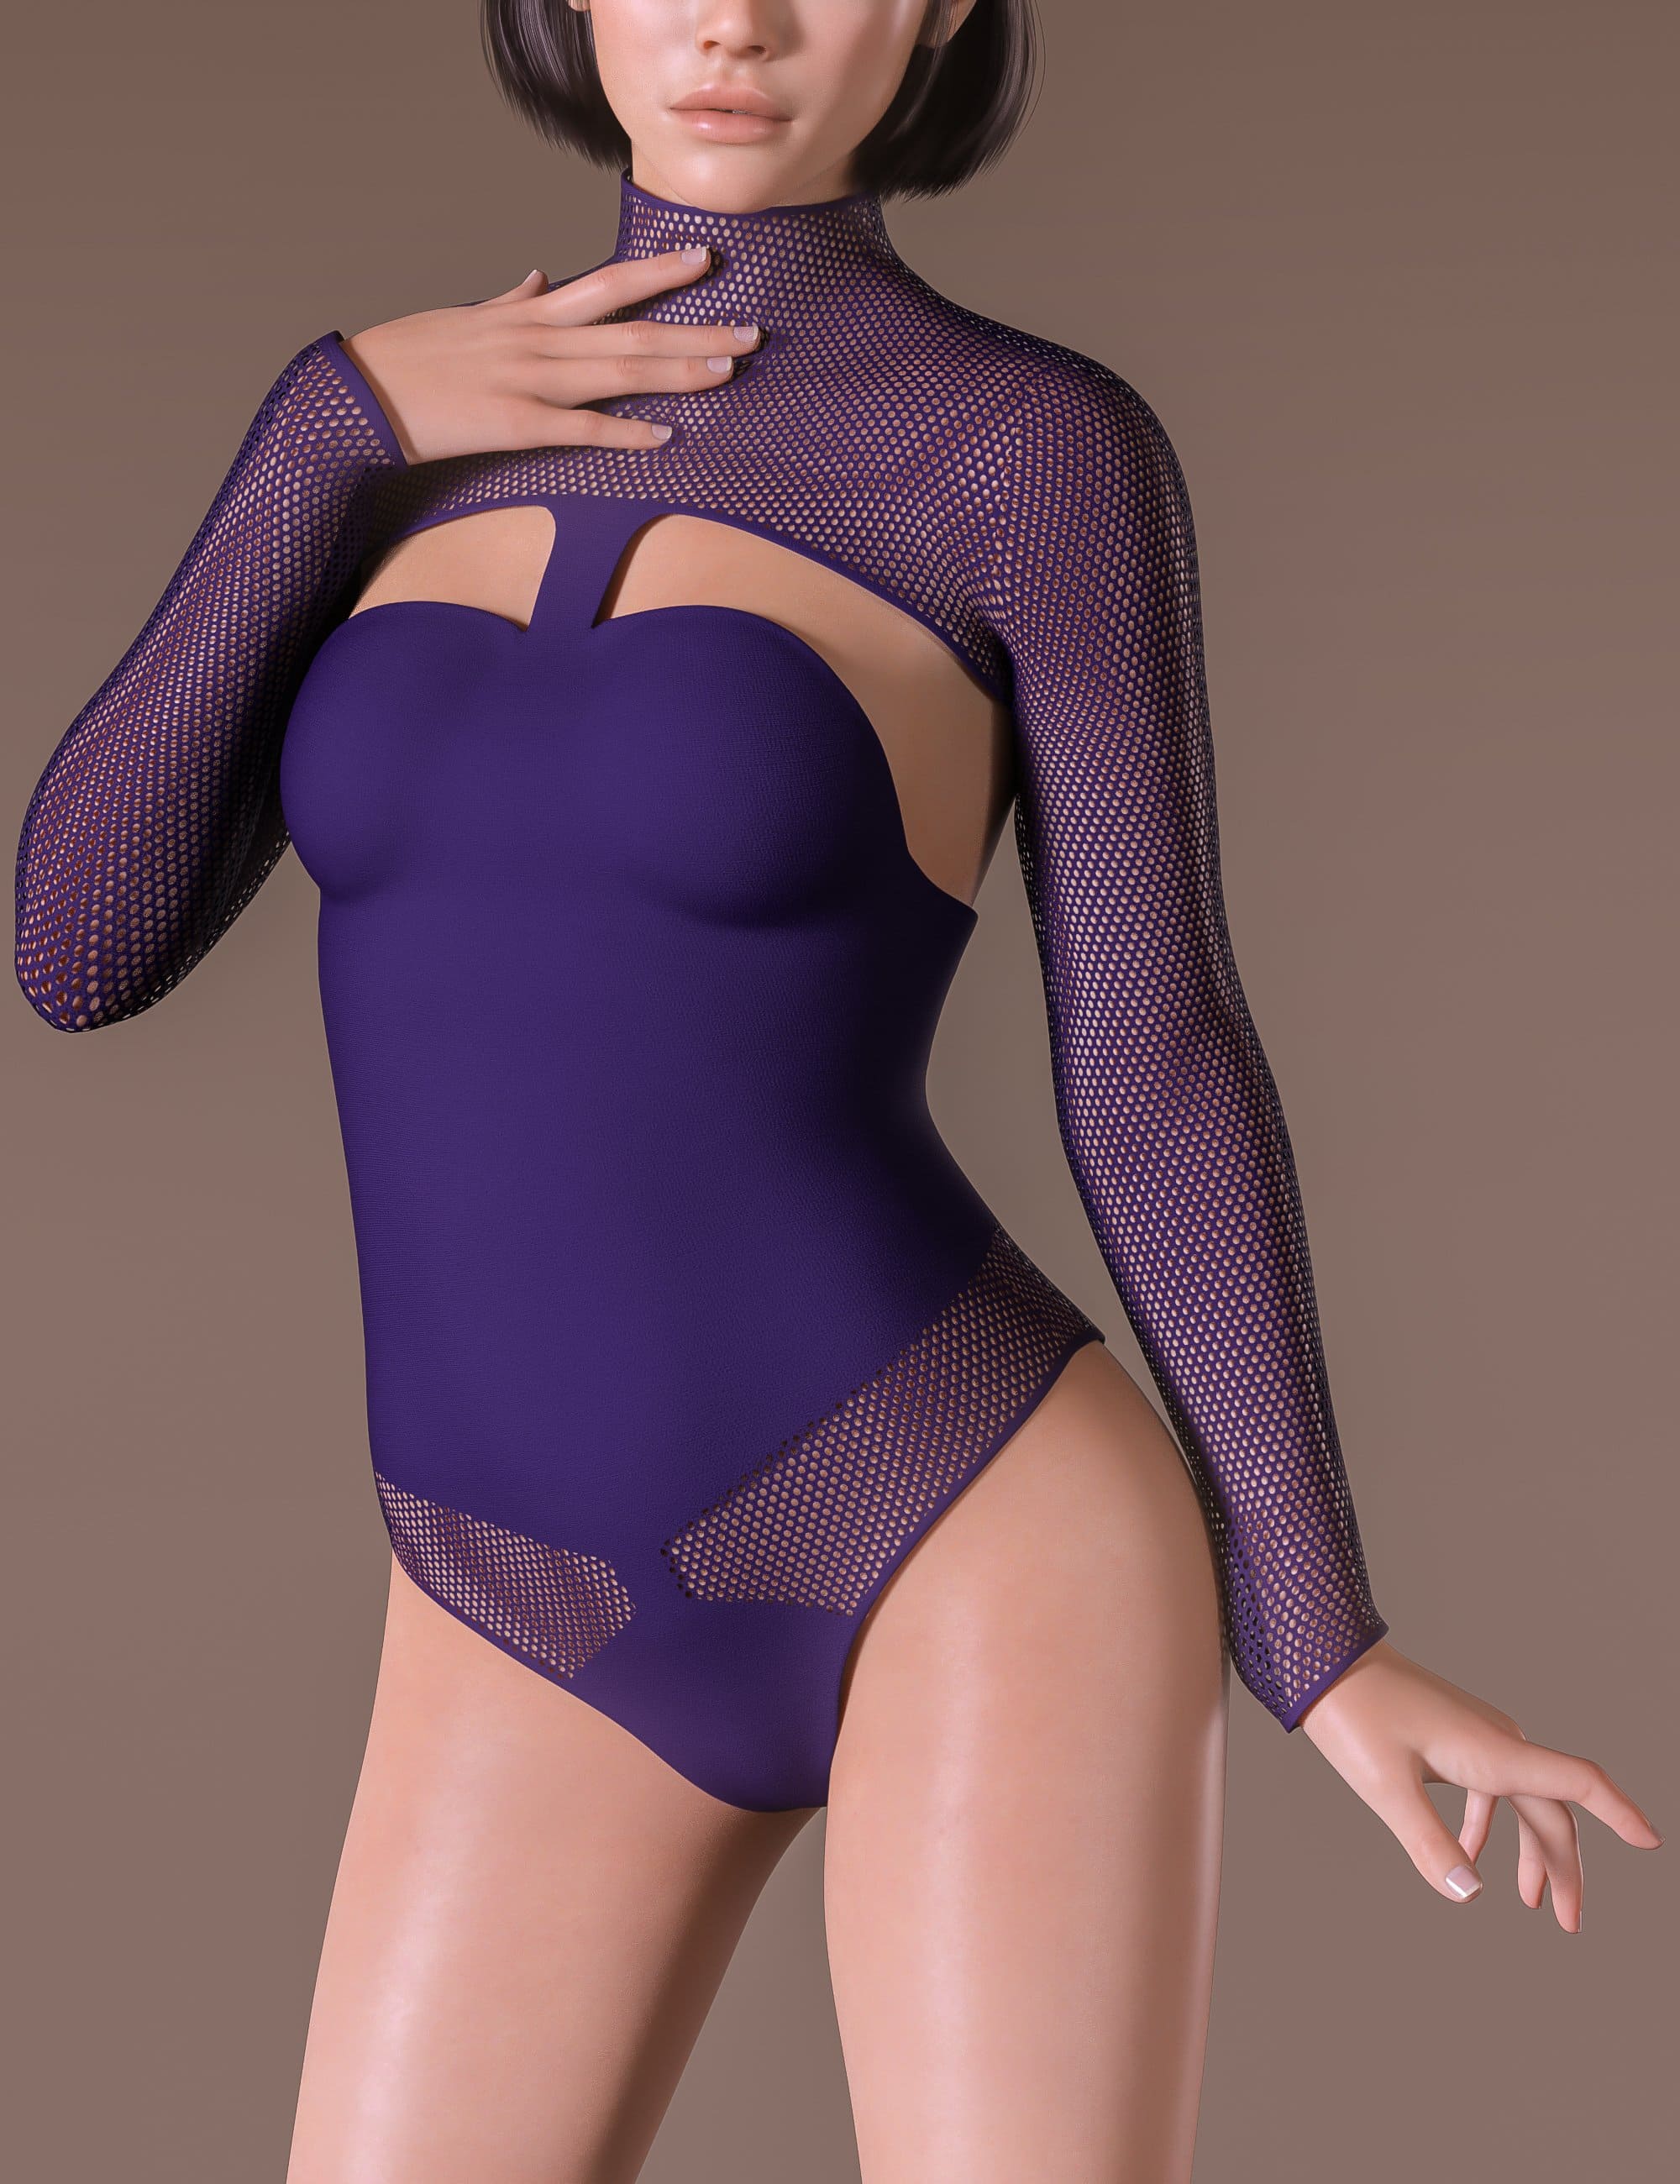 Cora Body Suit Outfit for Genesis 8 and 8.1 FemalesUntitled_DAZ3D下载站